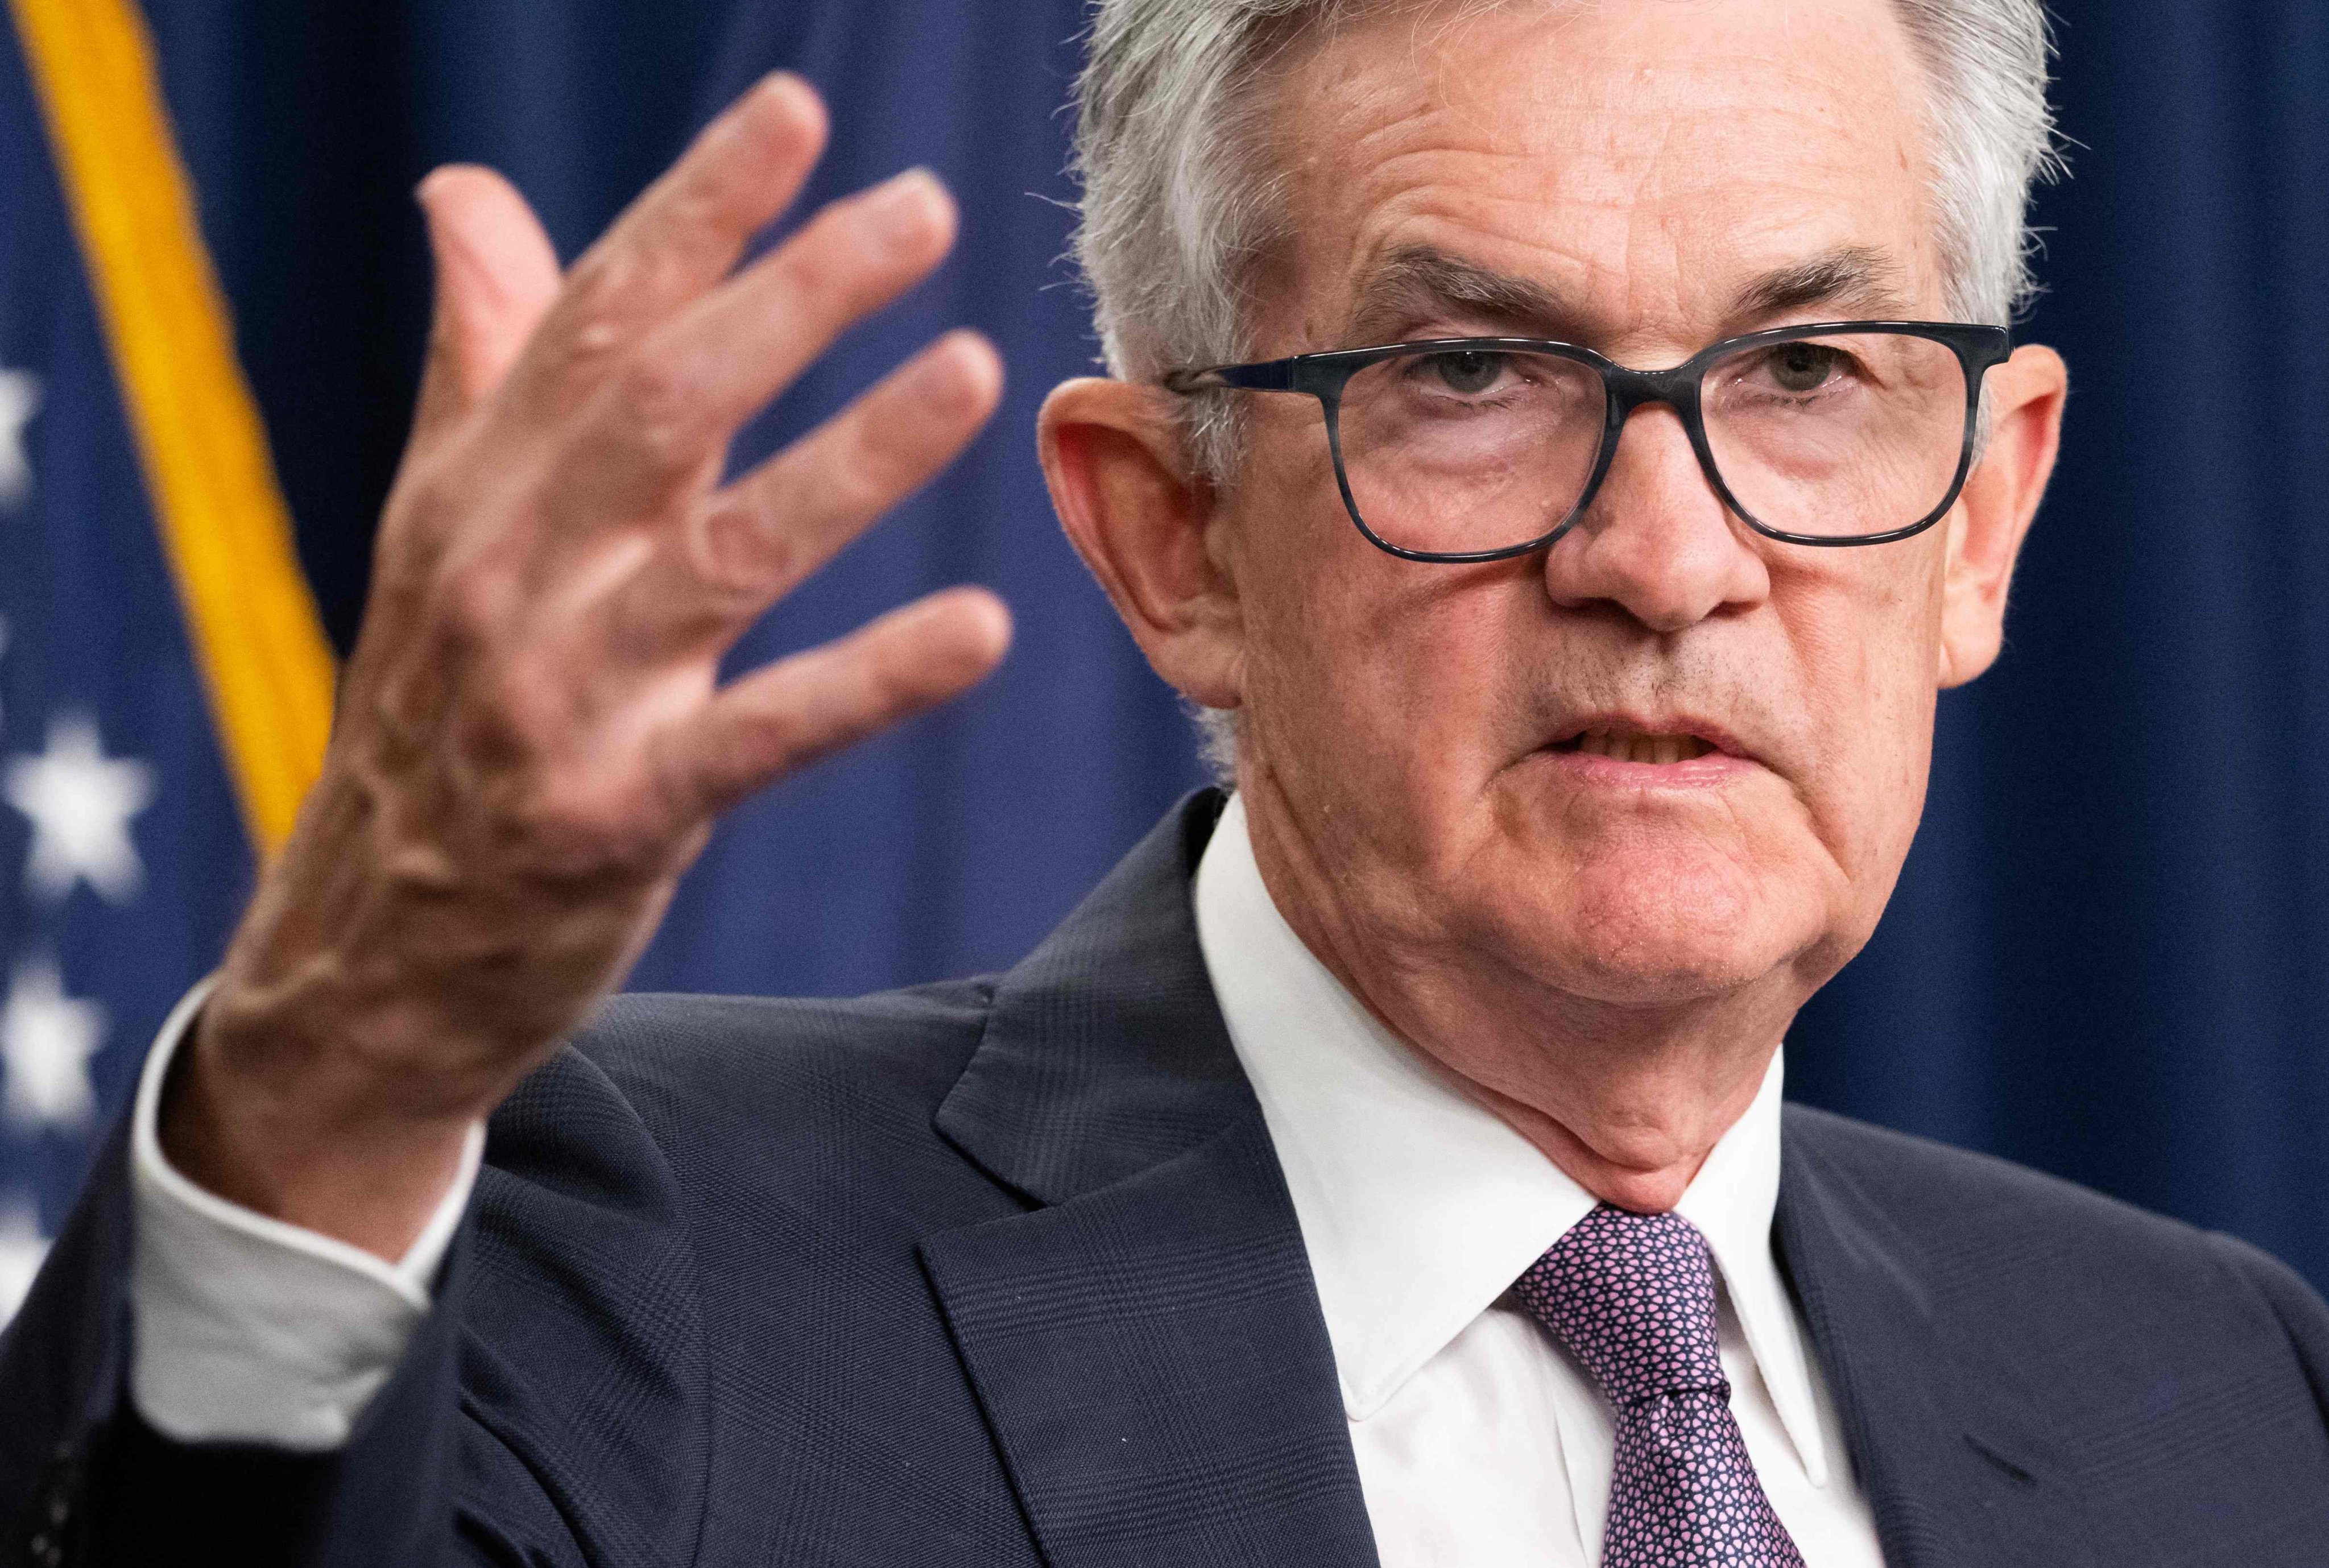 US Federal Reserve Board chairman Jerome Powell speaks during a news conference in Washington on September 21. Photo: AFP